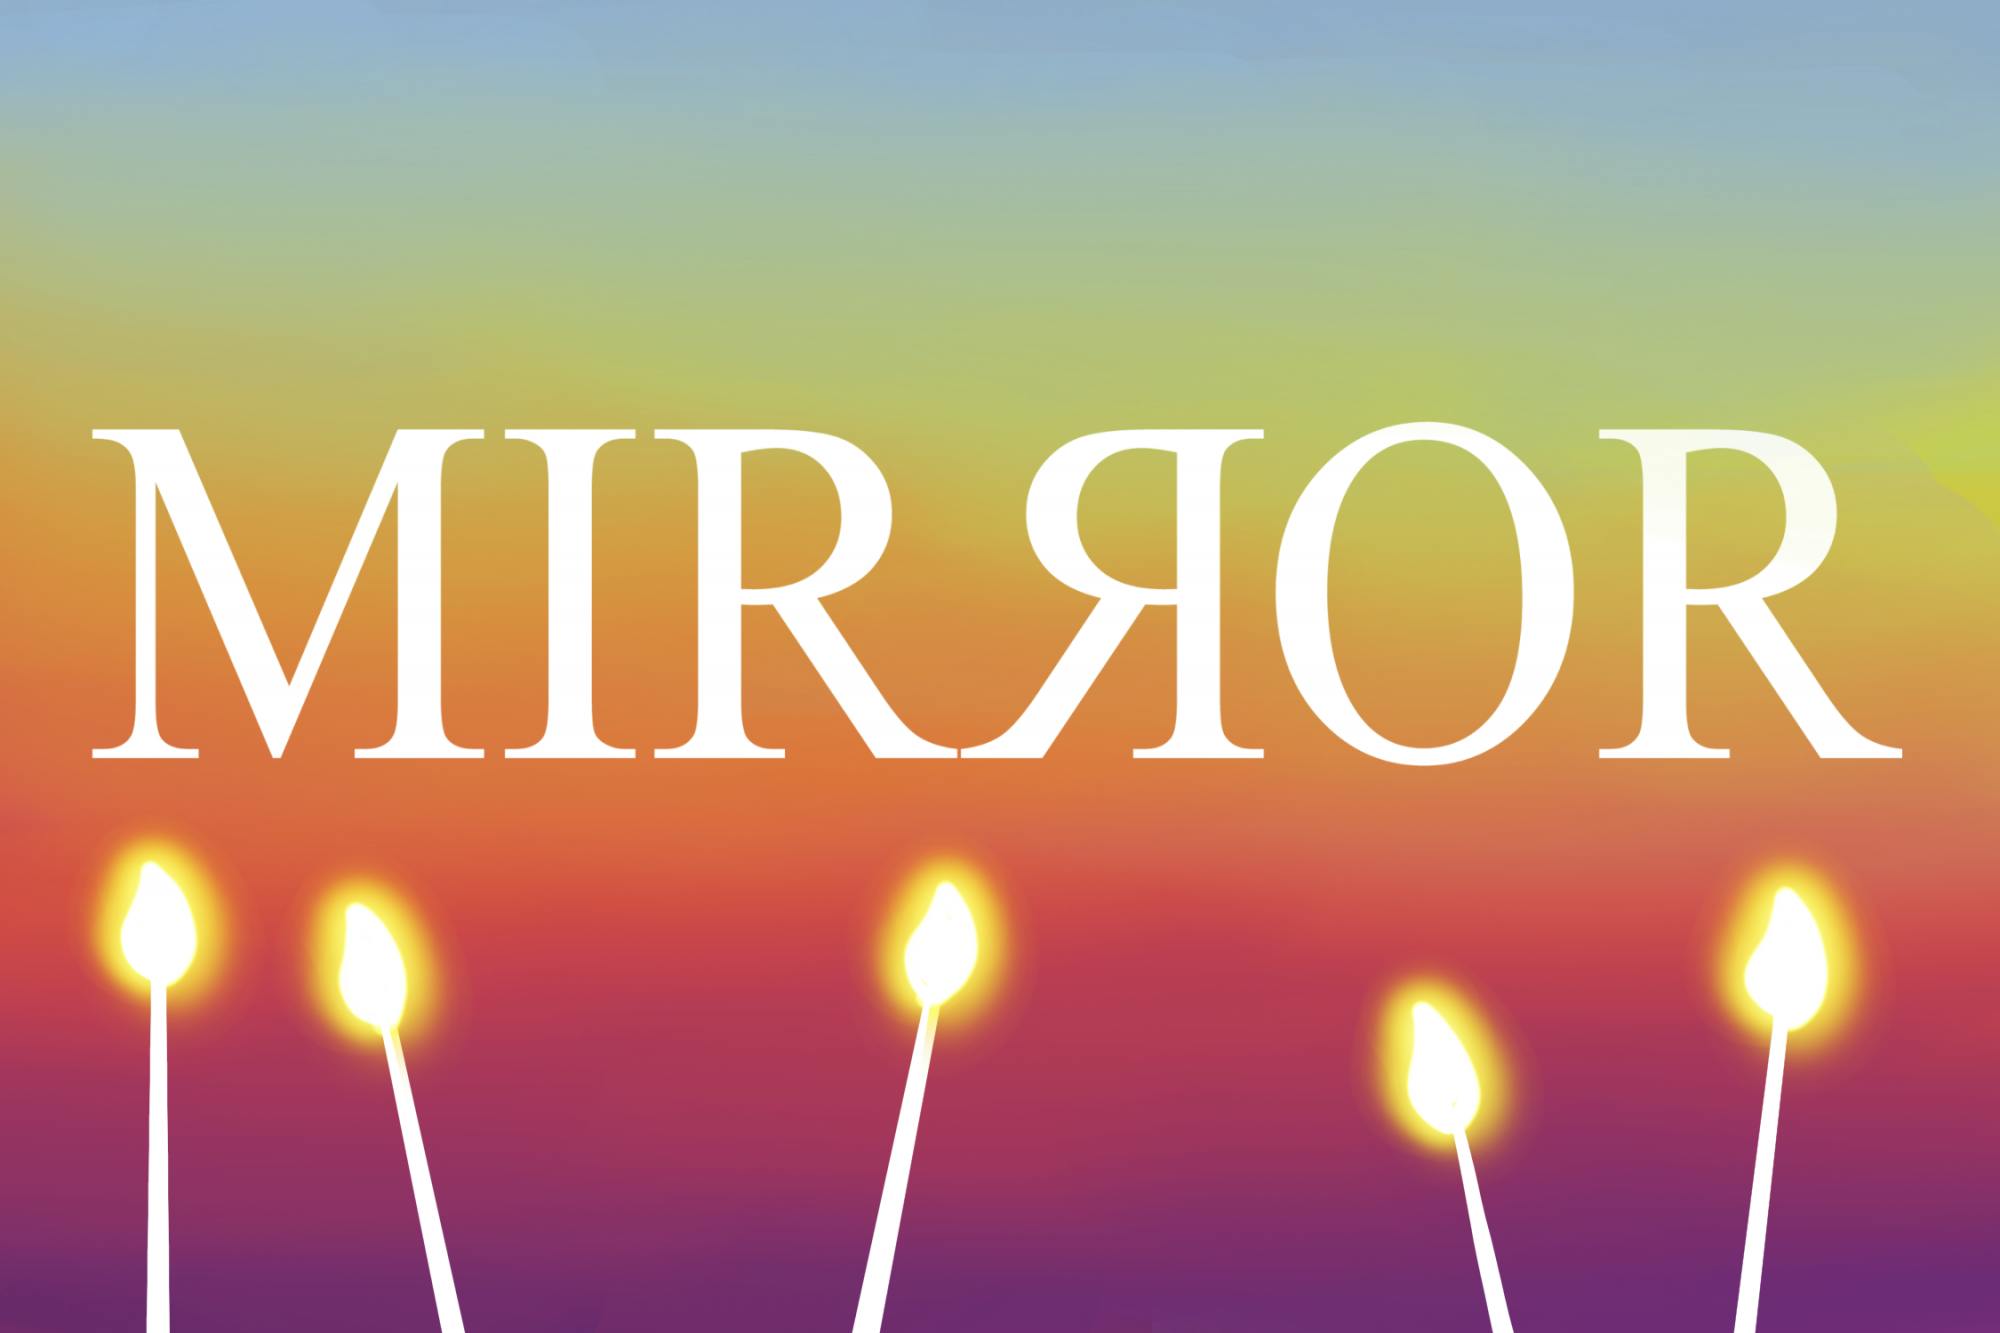 mirror cover 9.22.21.png